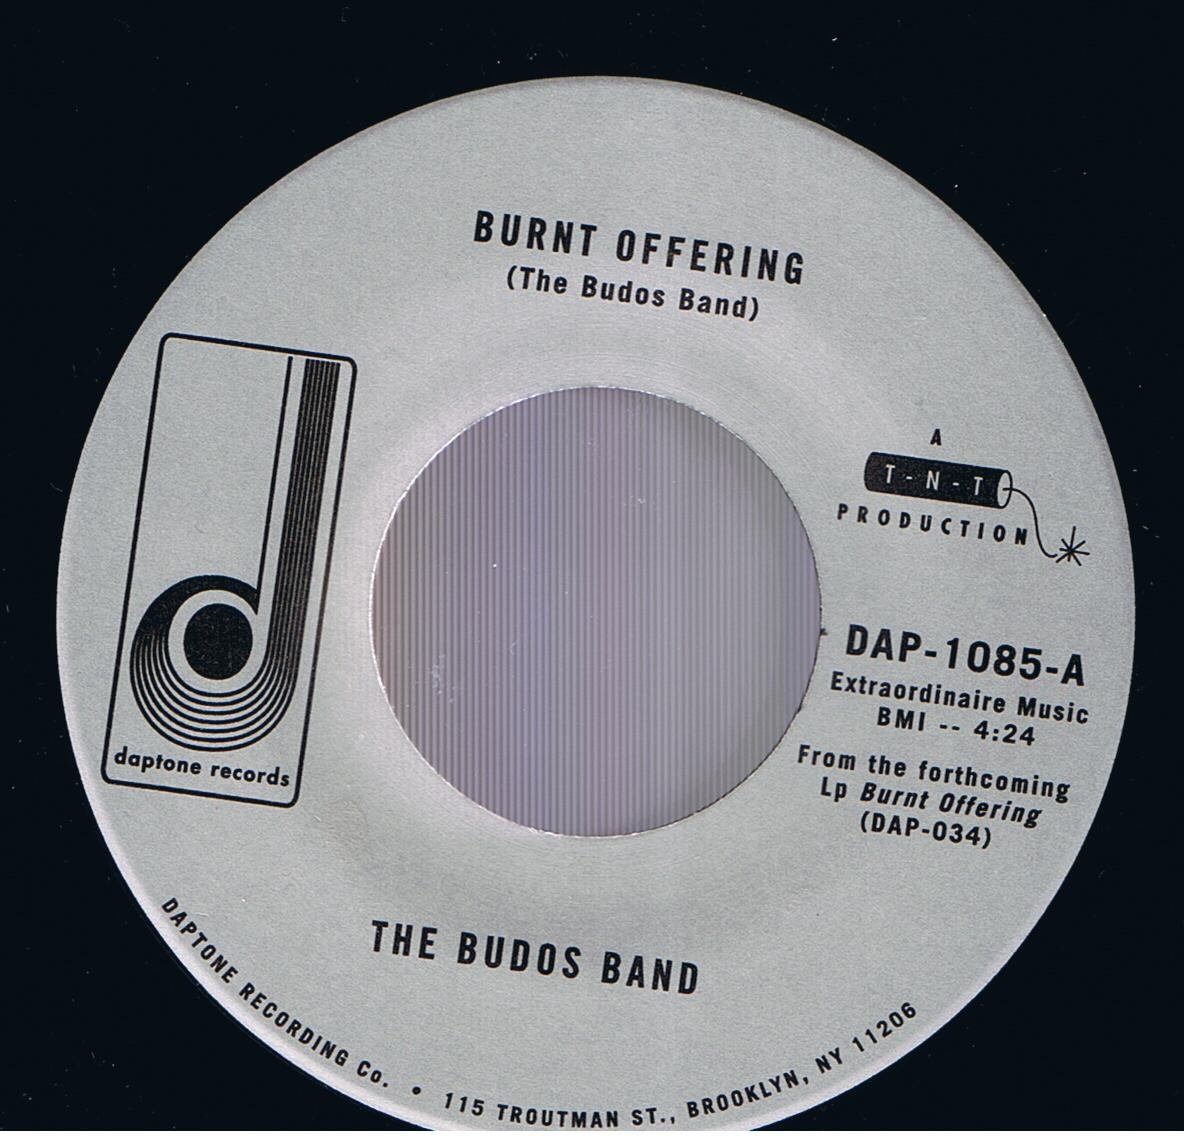 The Budos Band - Burnt Offering / The Budos Band - Seizure (7")